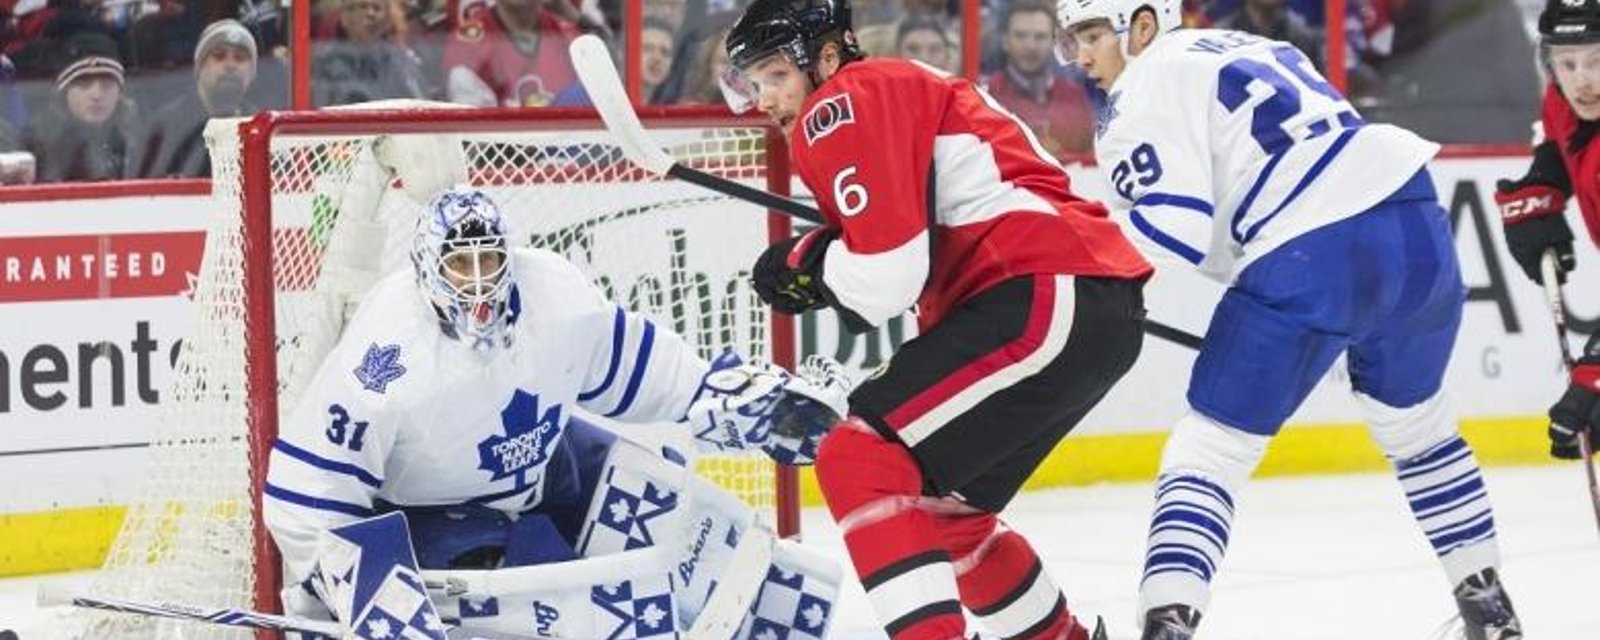 Report: Leafs could lose talented defenseman to KHL offer.